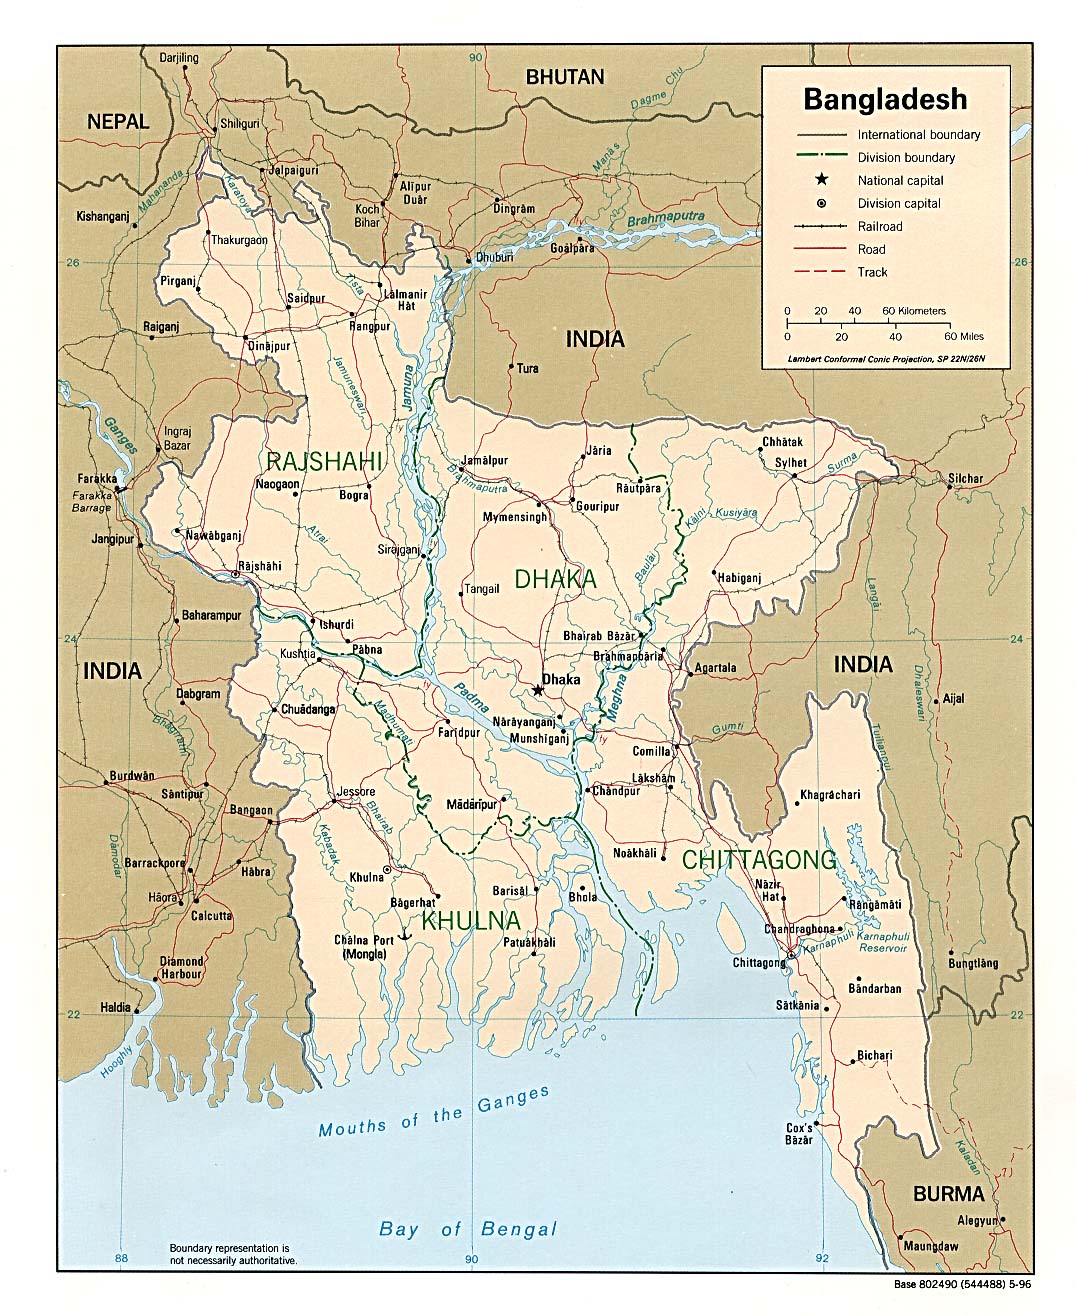 Bangladesh Maps - Perry-Castañeda Map Collection - UT Library Online